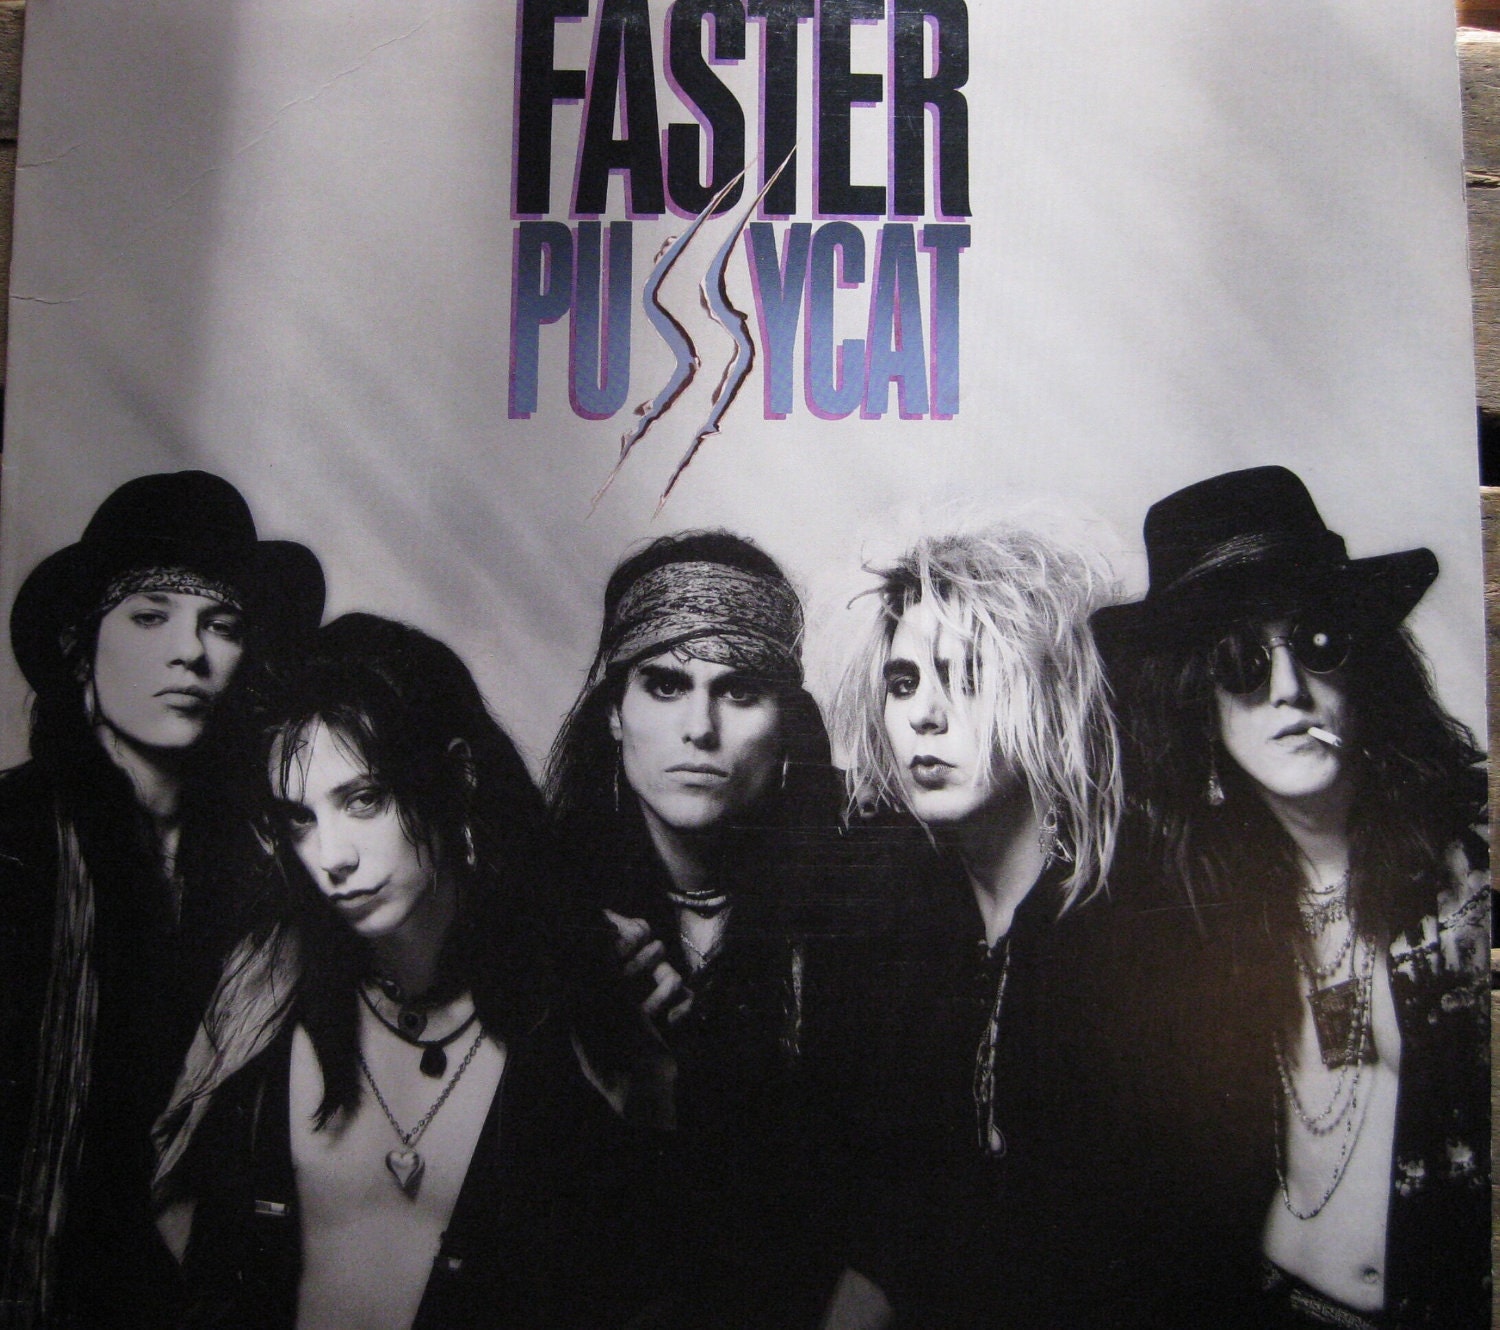 Faster Pussycat Self Titled Vinyl Record By Thewaybackmachine 